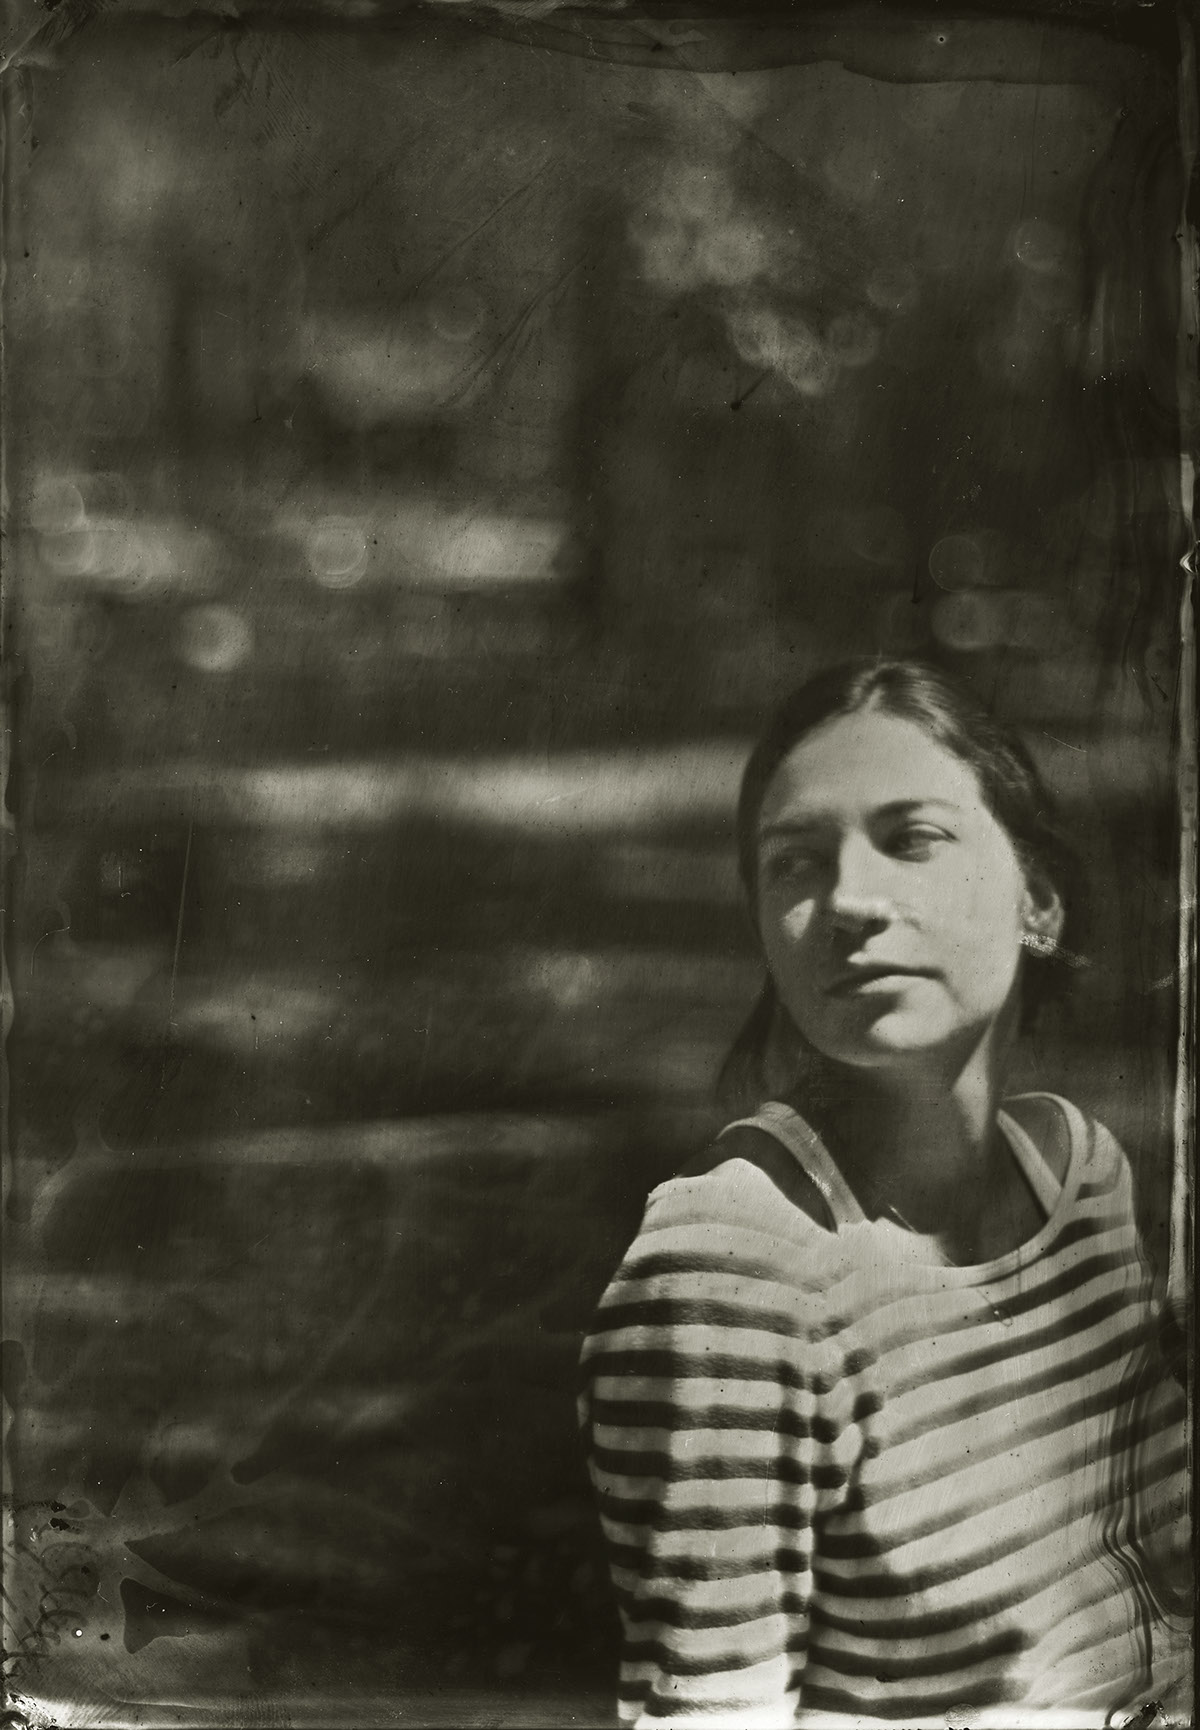 tintype wet plate 5x7 large format southern Georgia Savannah Documentary  collodion